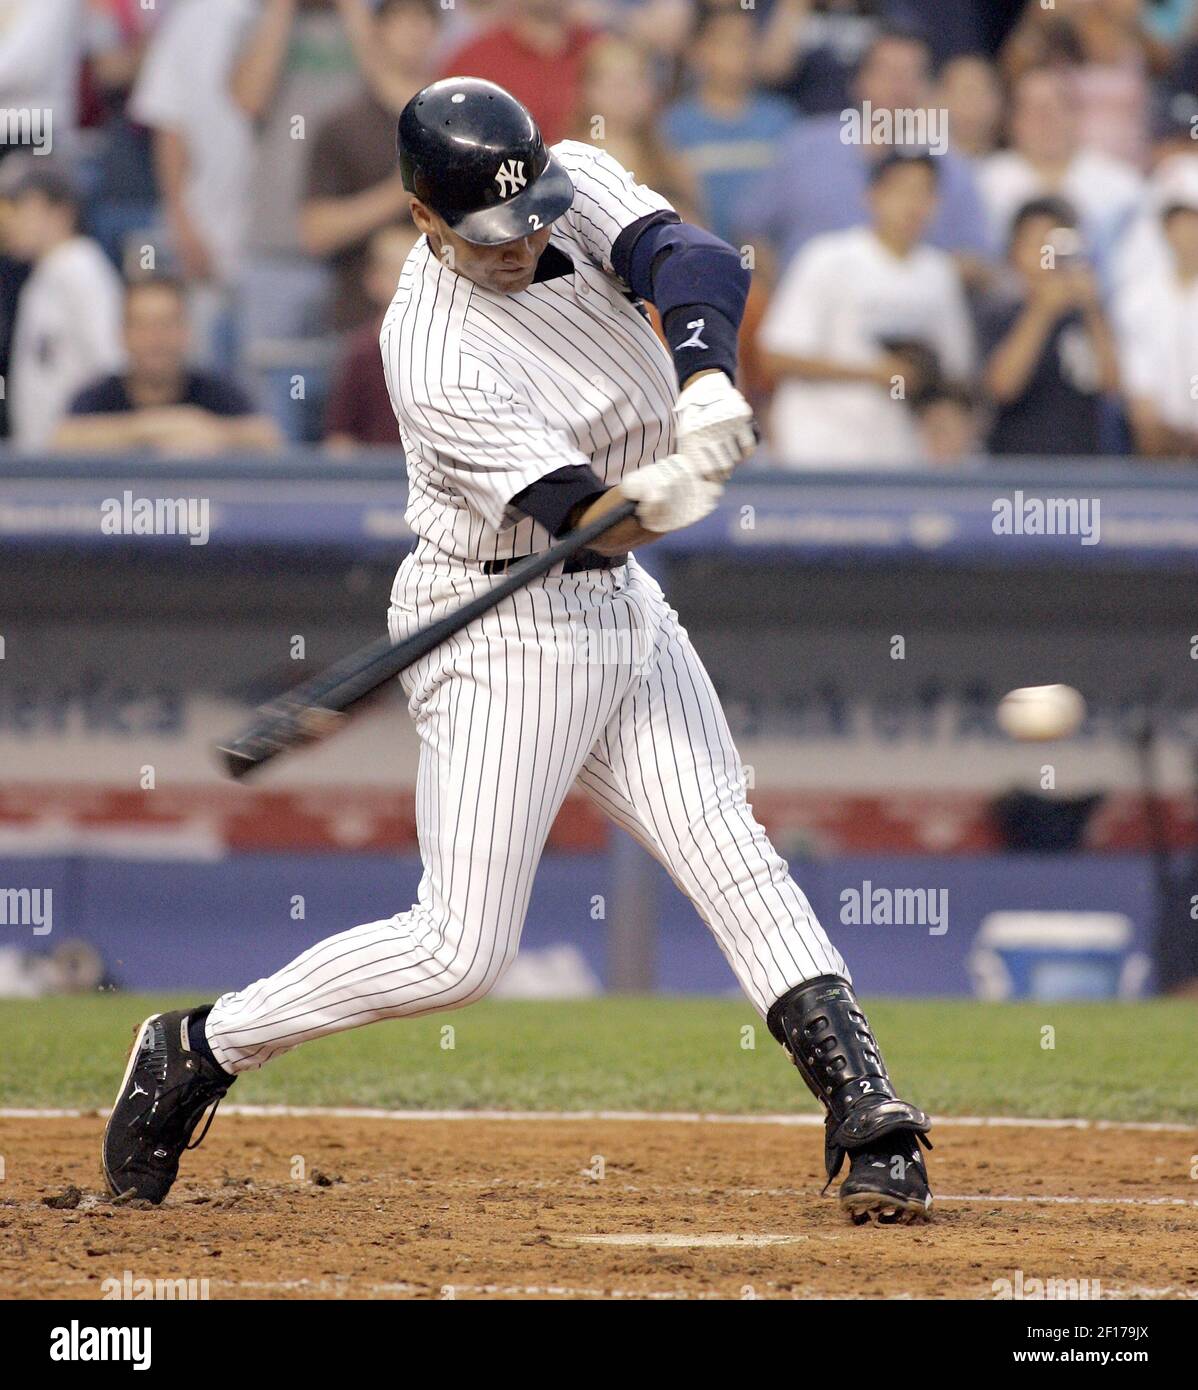 New York Yankees' Derek Jeter hits a single in the fourth inning